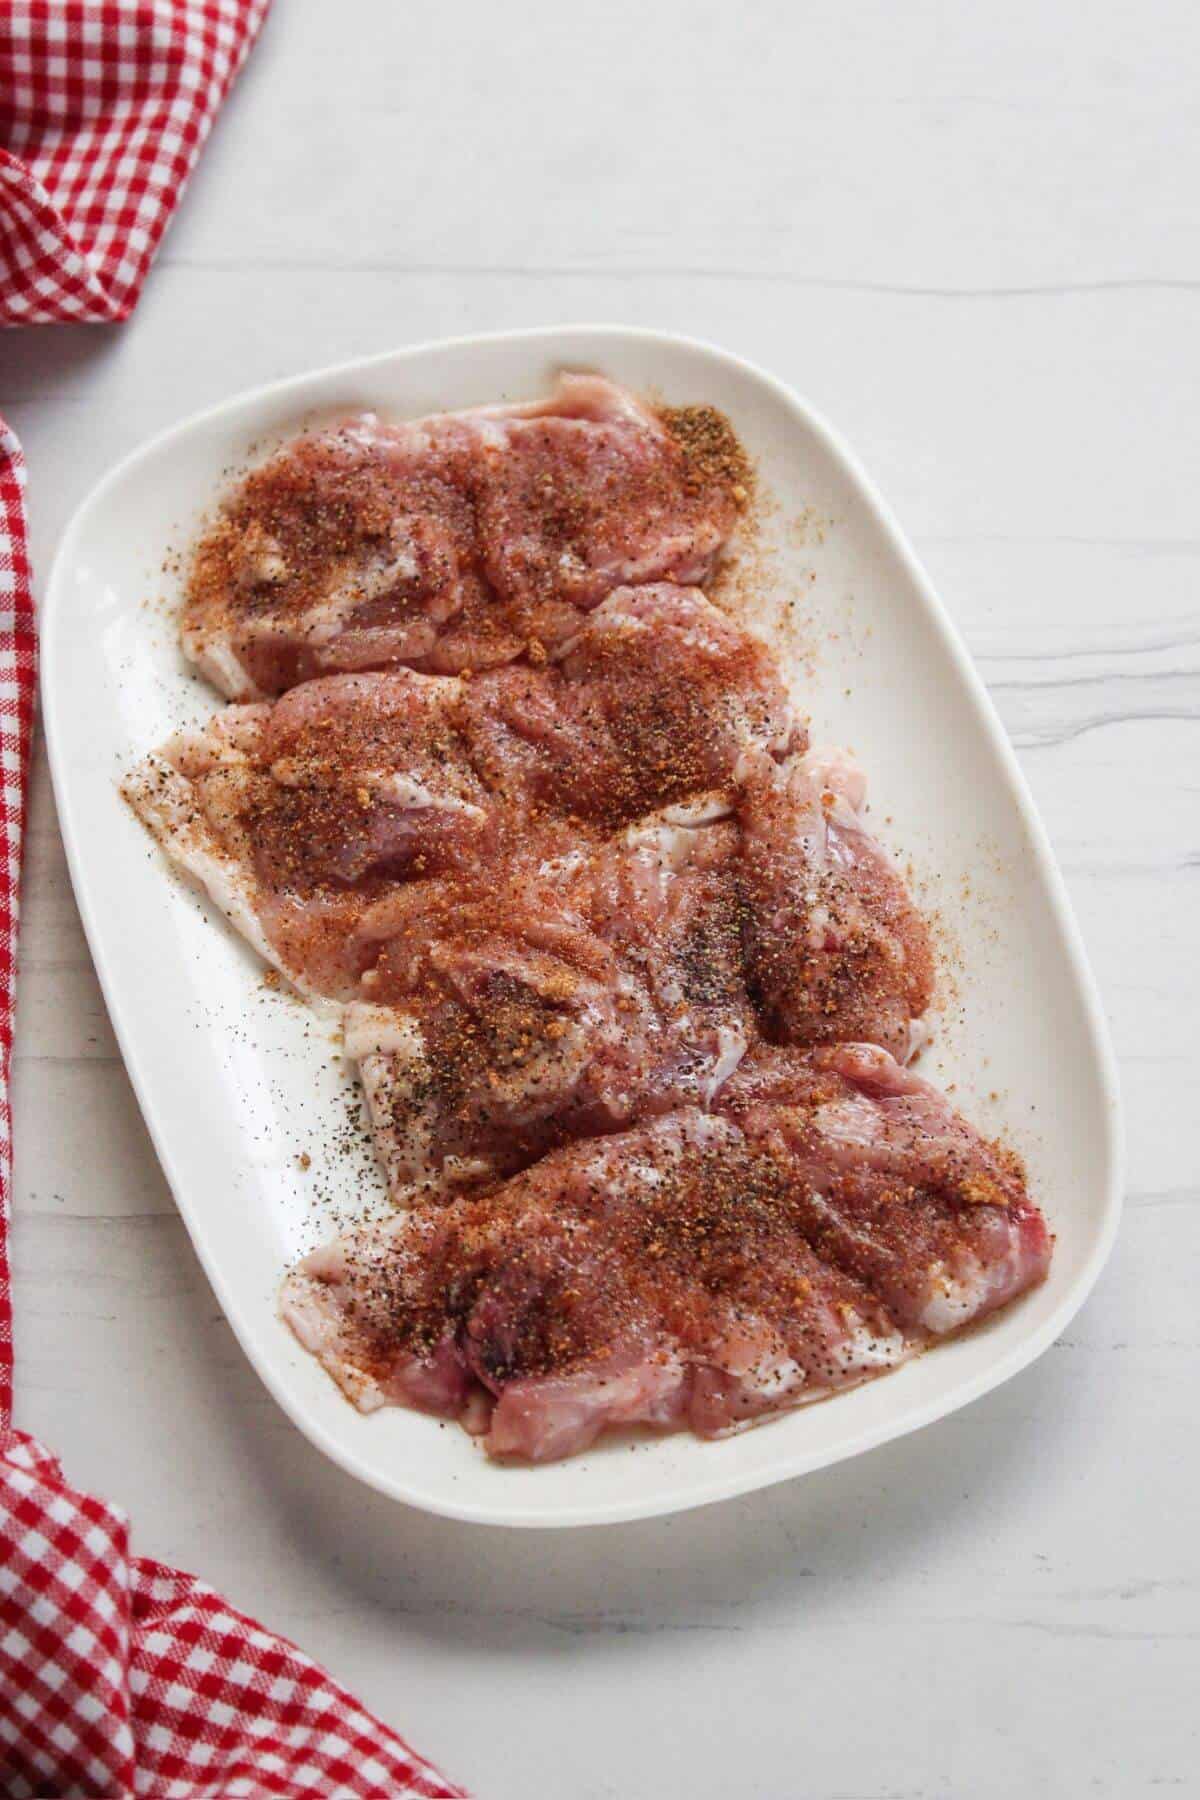 Seasoned chicken thighs on a white plate with a red and white checkered tablecloth.